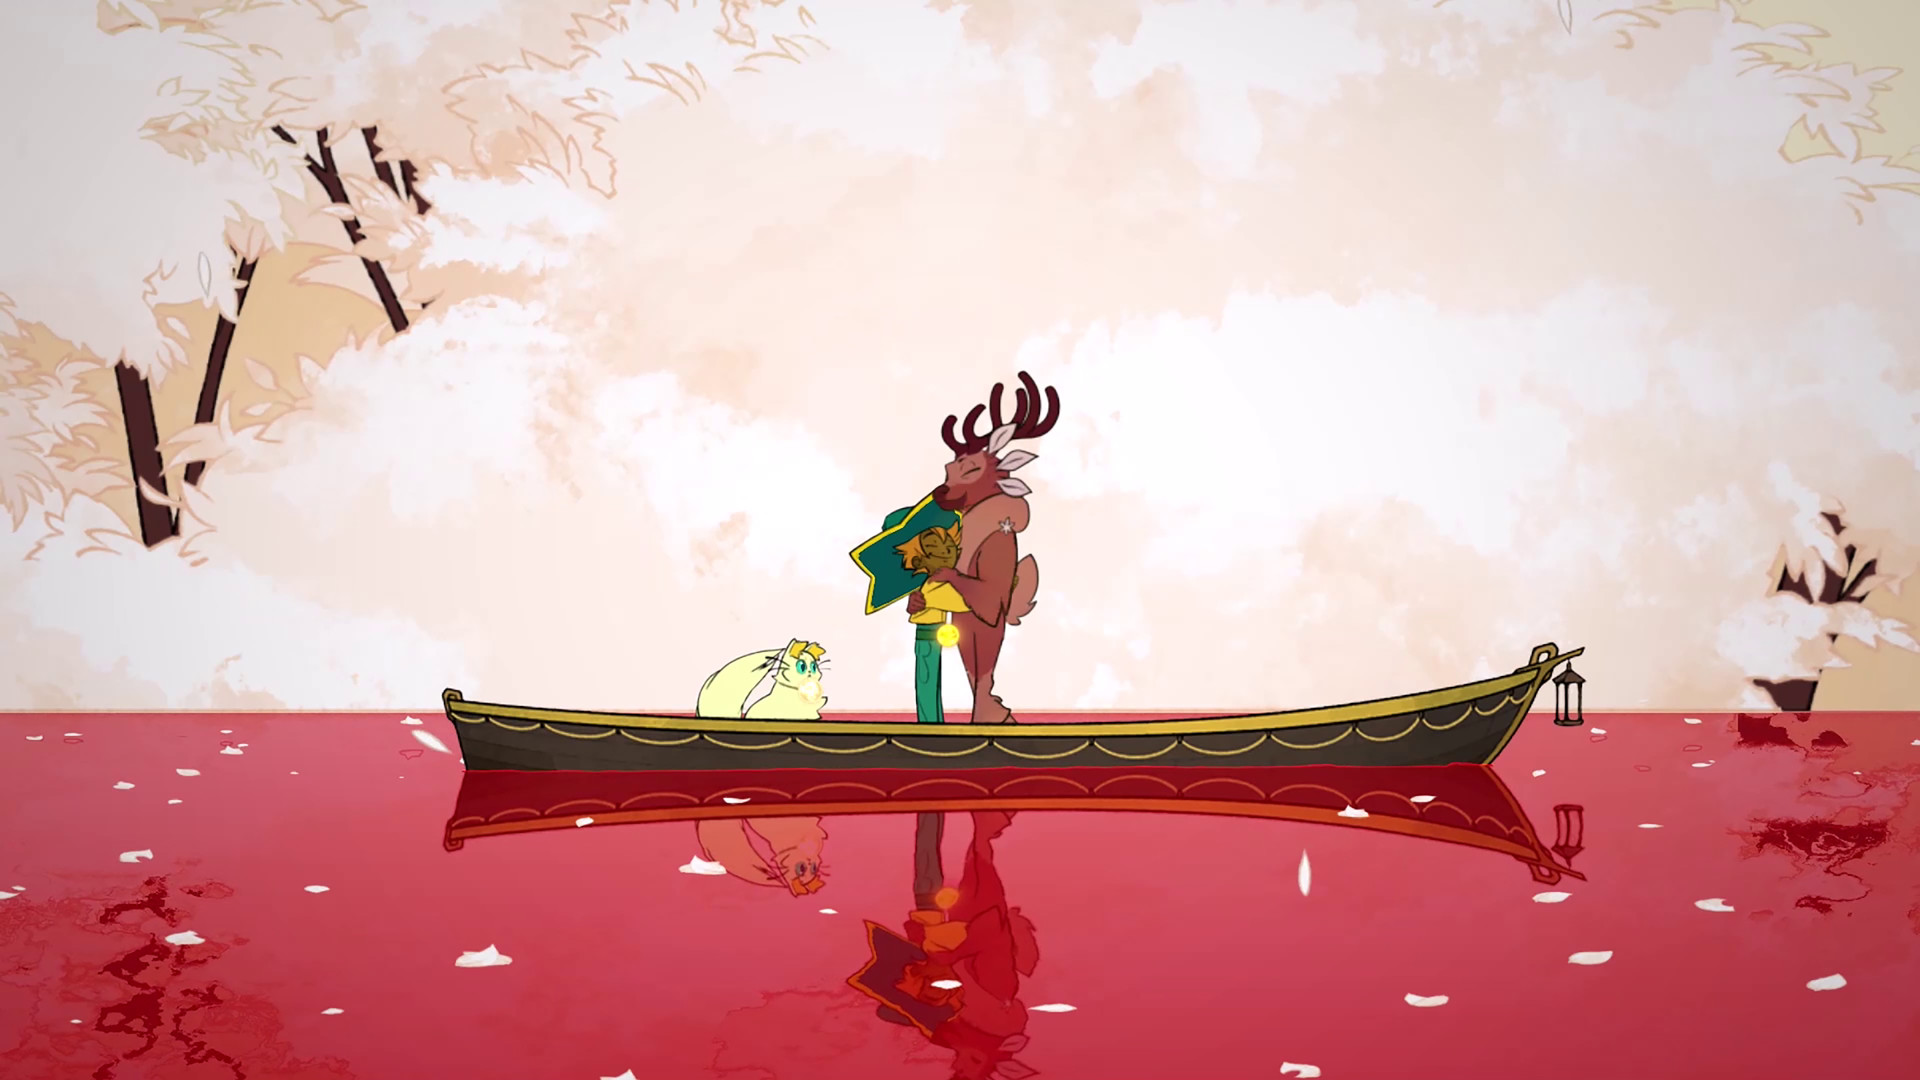 Stella and an anthropomorphic deer character hugging in a row boat sitting on reddish water.